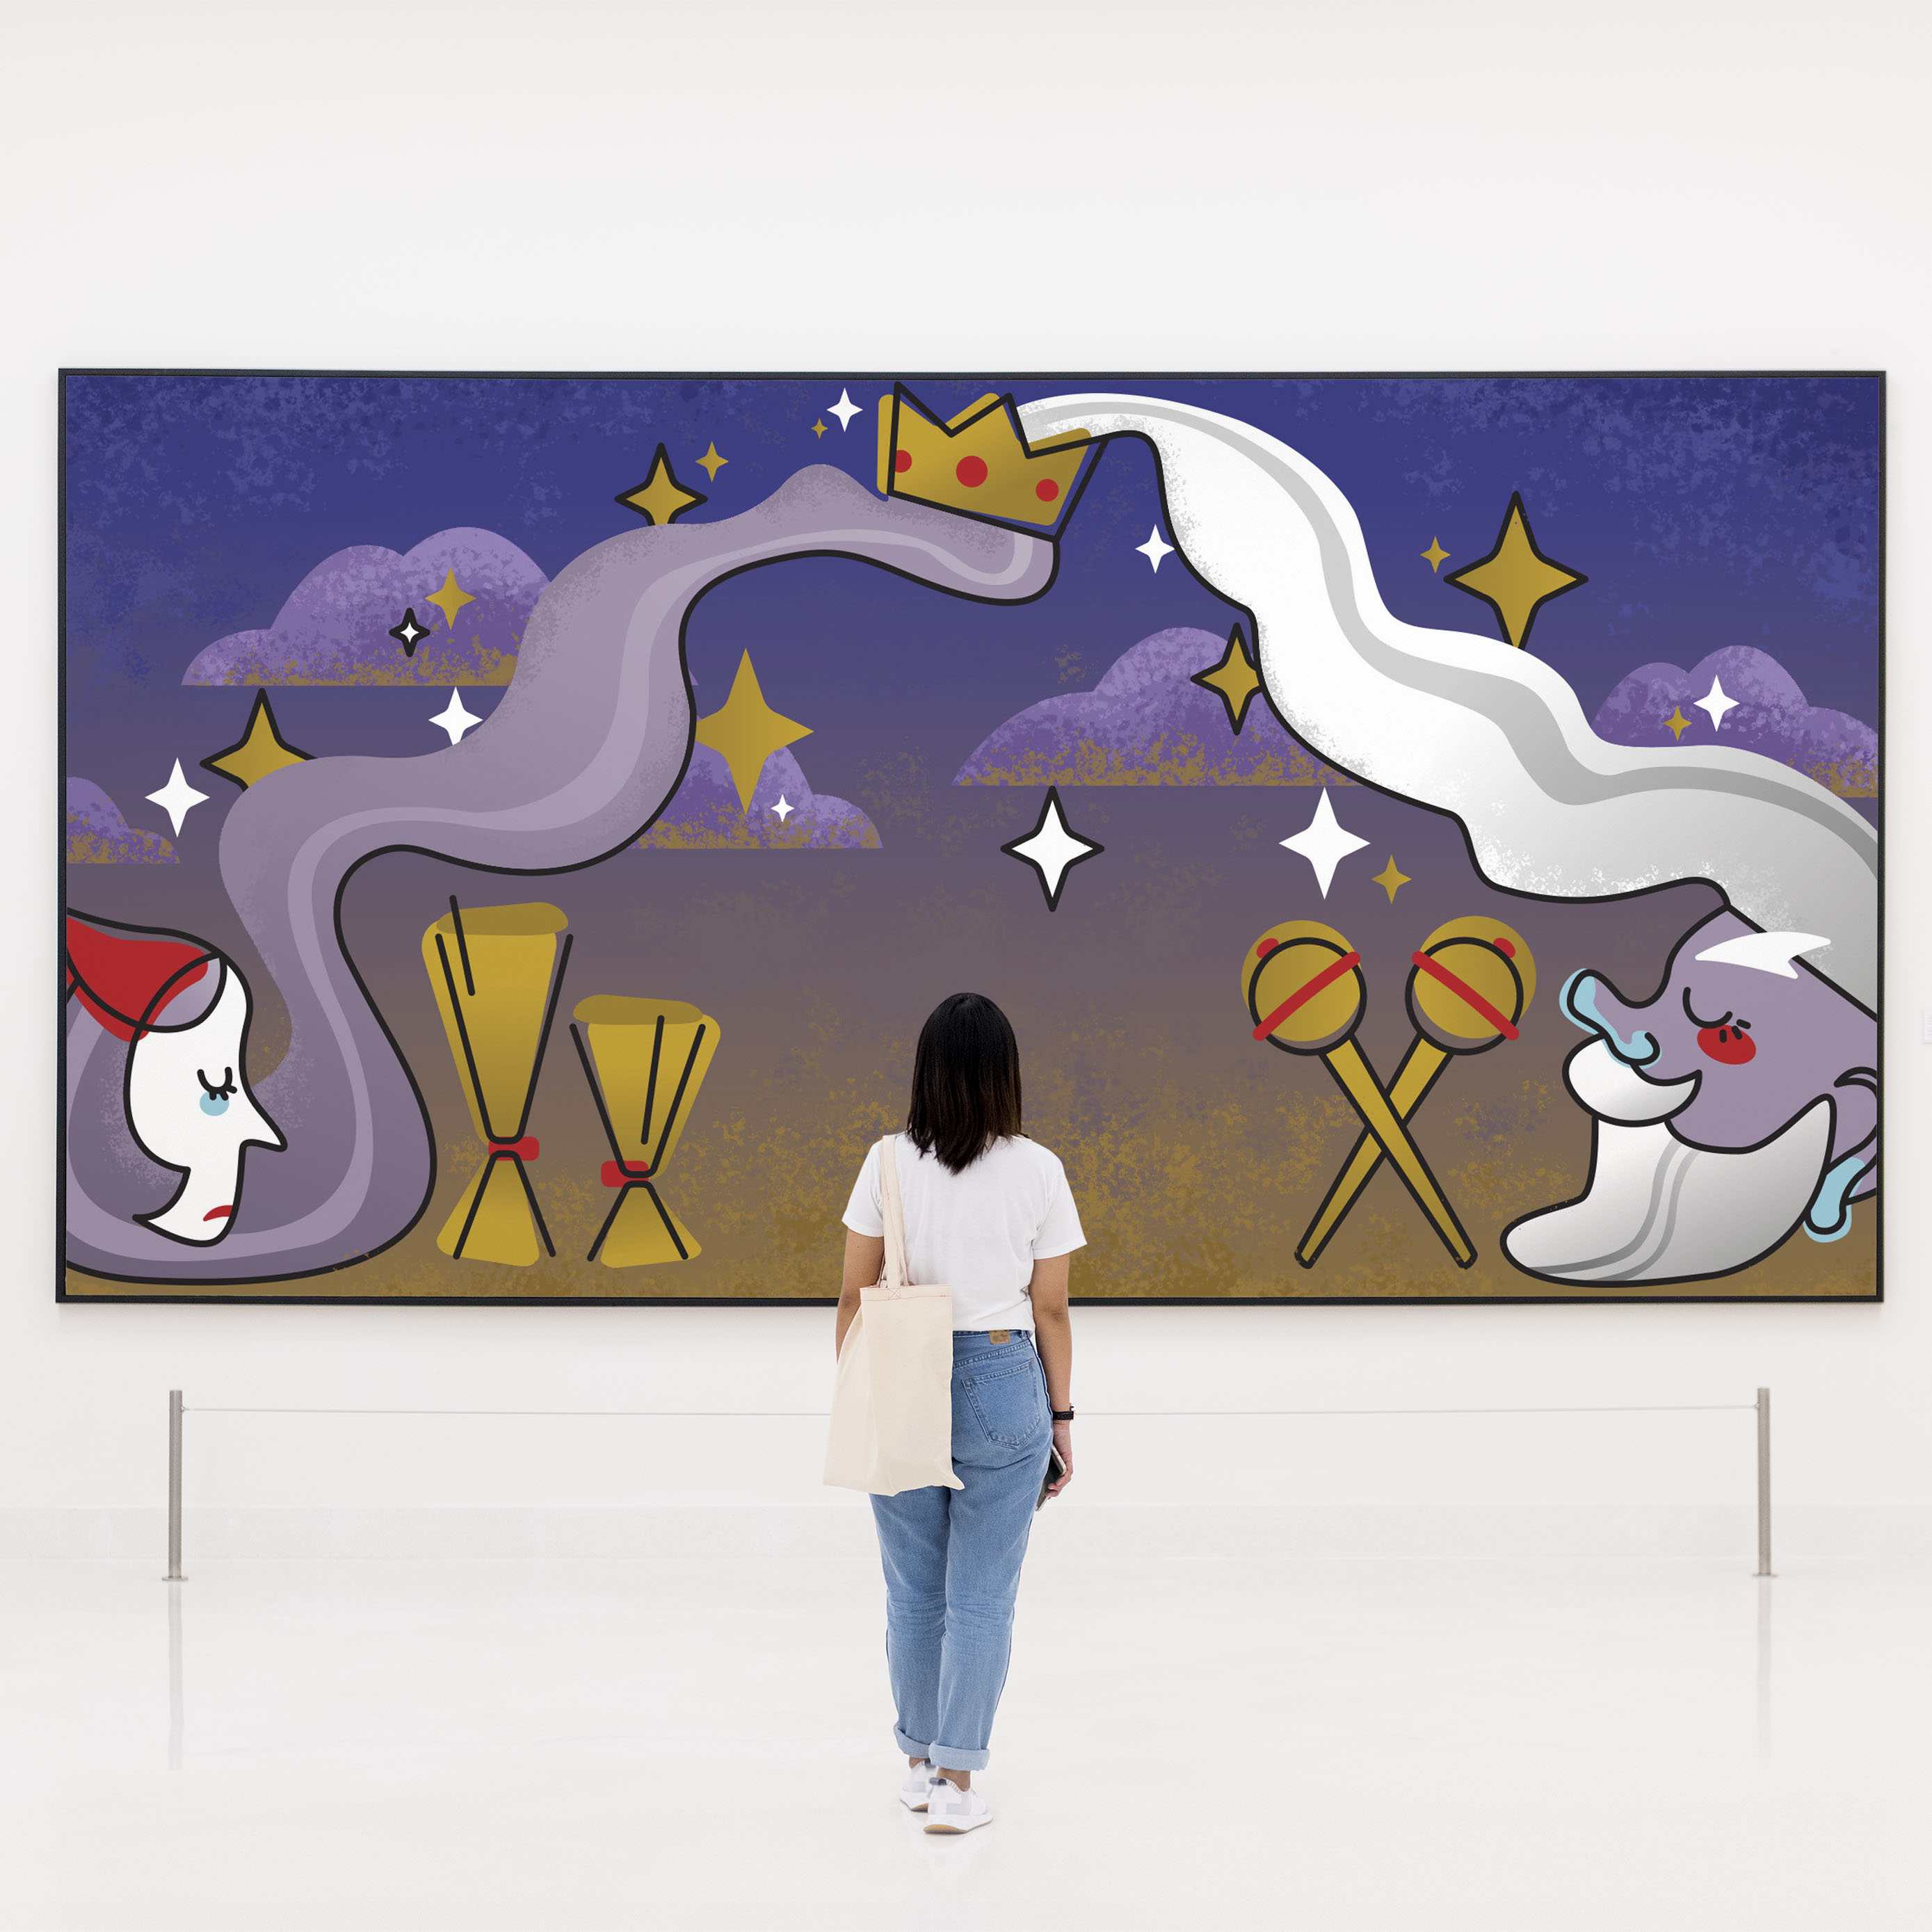 Mural - peasent to king mockup in museum